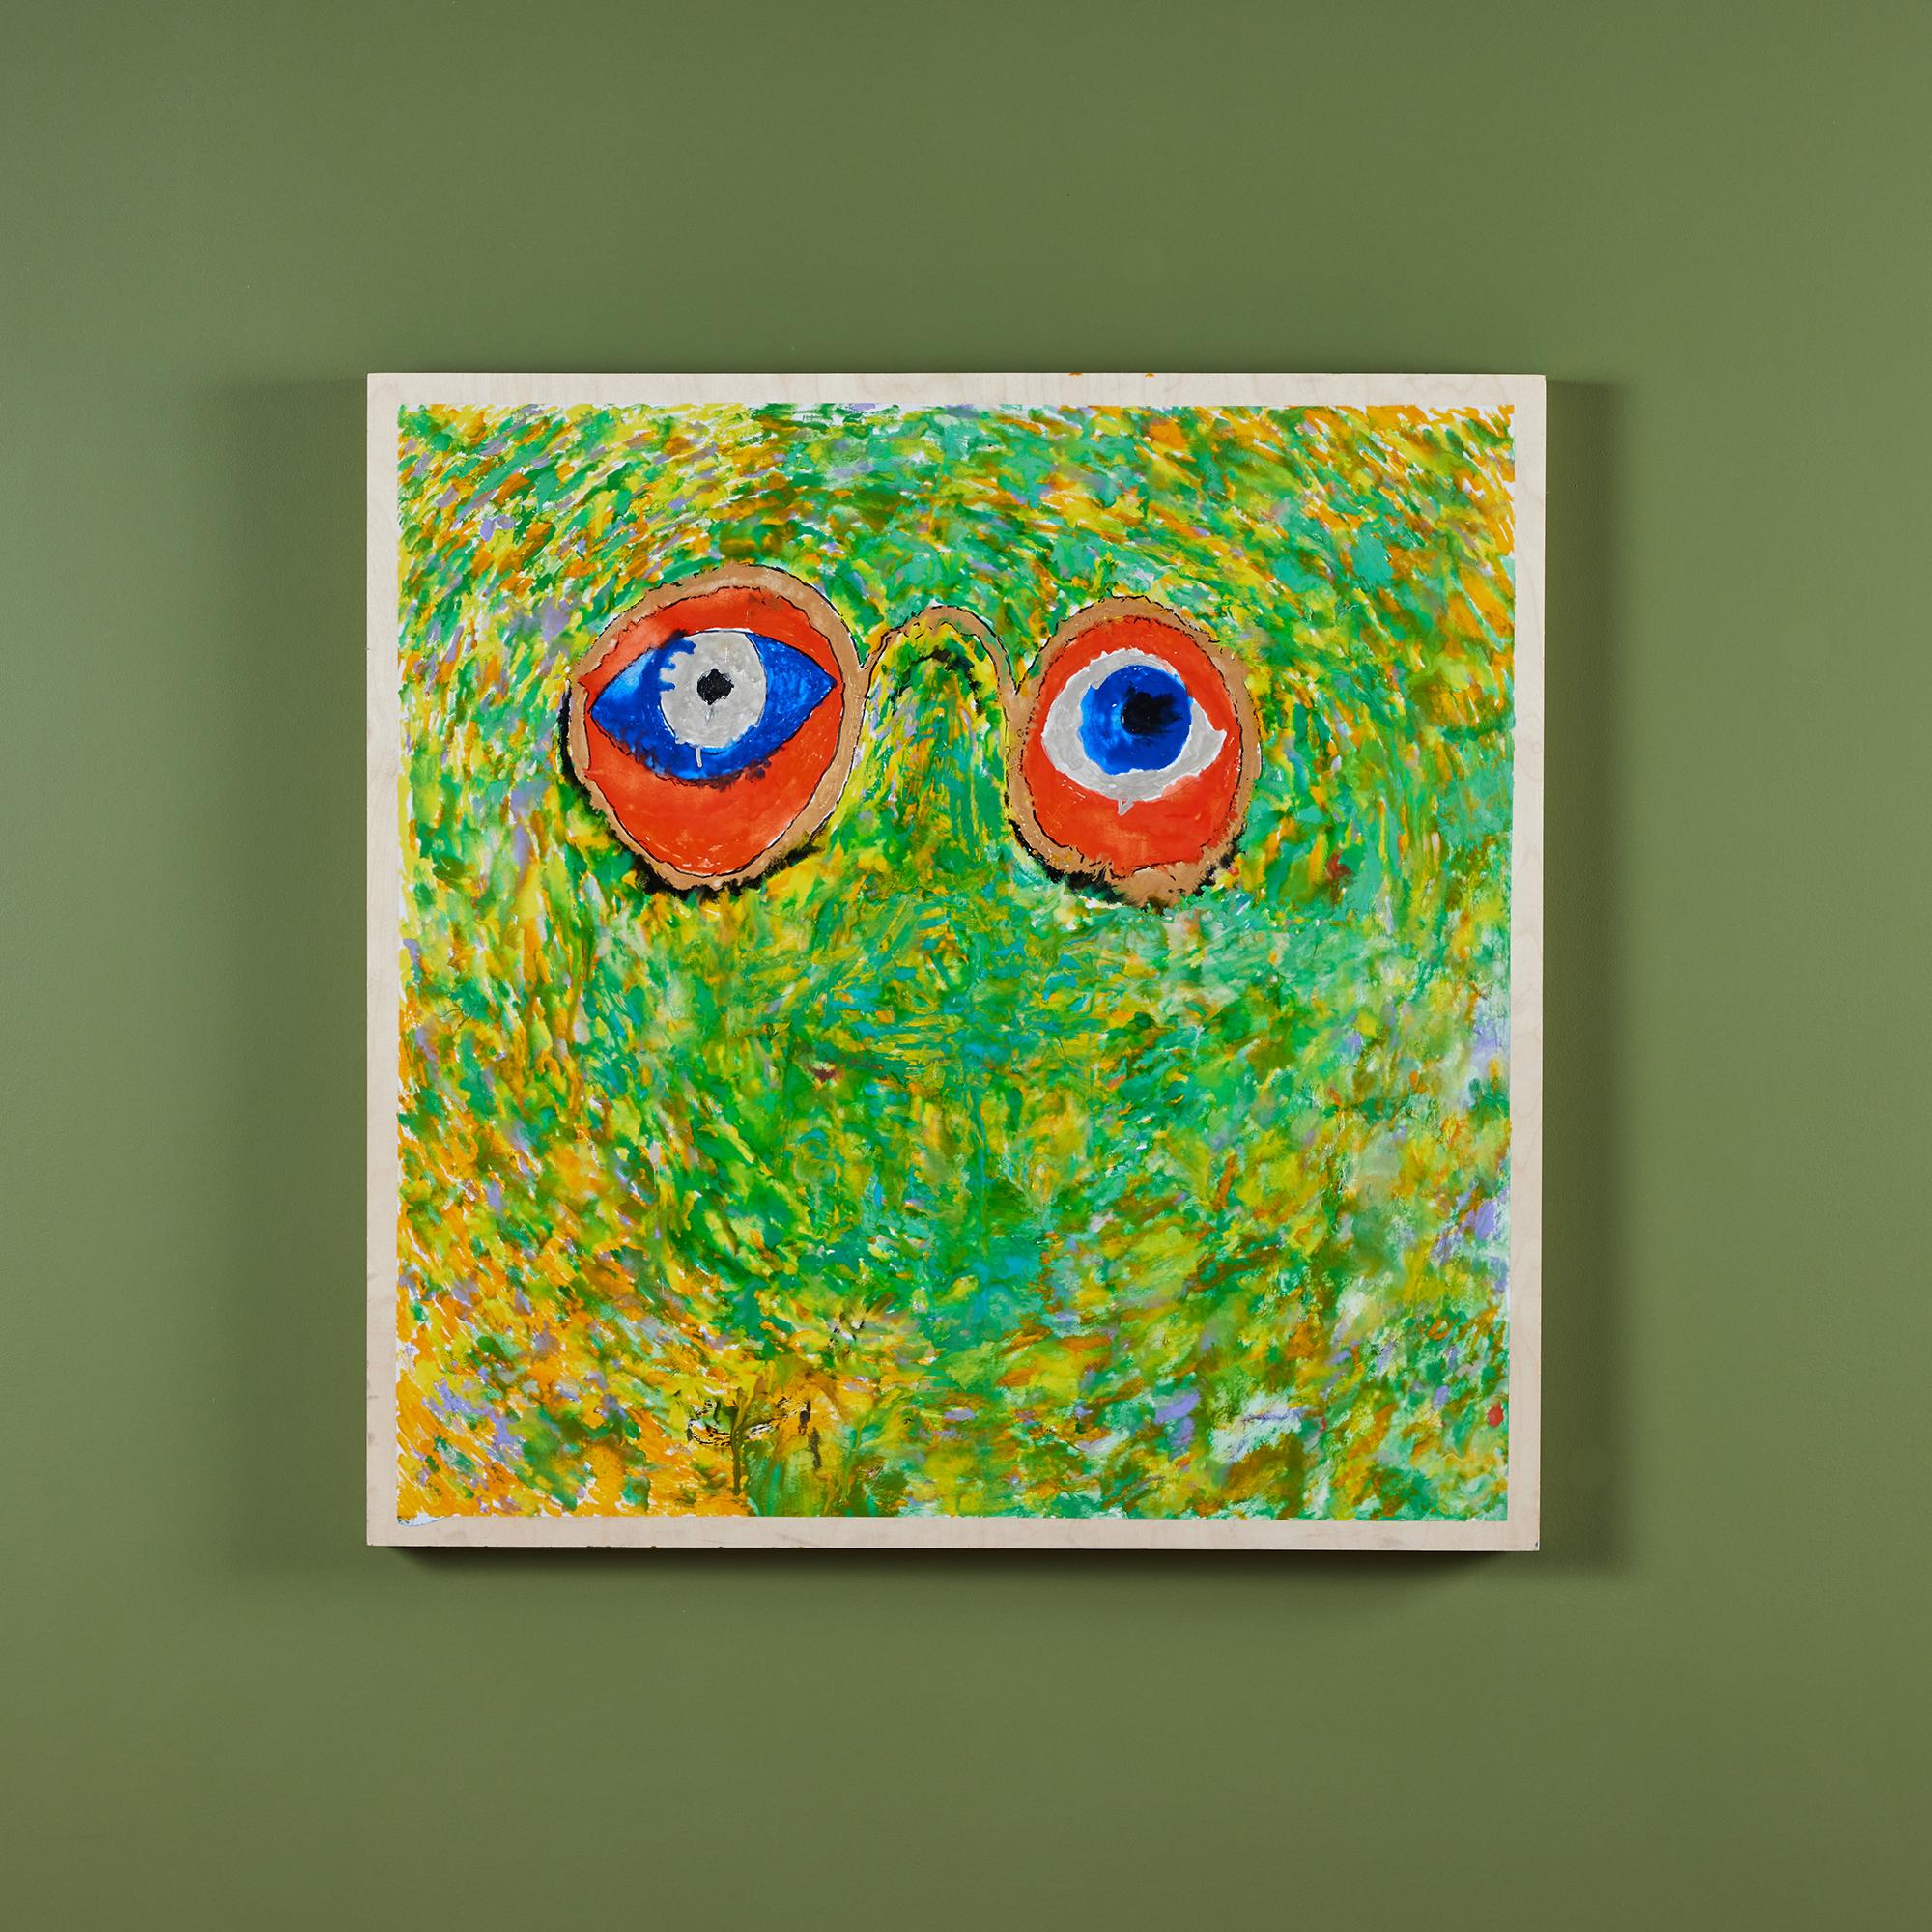 Acrylic painting on hardwood by San Diego artist, Bob Matheny. The painting featuring eyeballs throws a nod to the Great Gatsby and Dr. T.J. Eckleberg as displayed on the back of the painting. The piece showcases vibrant neon colors of green orange